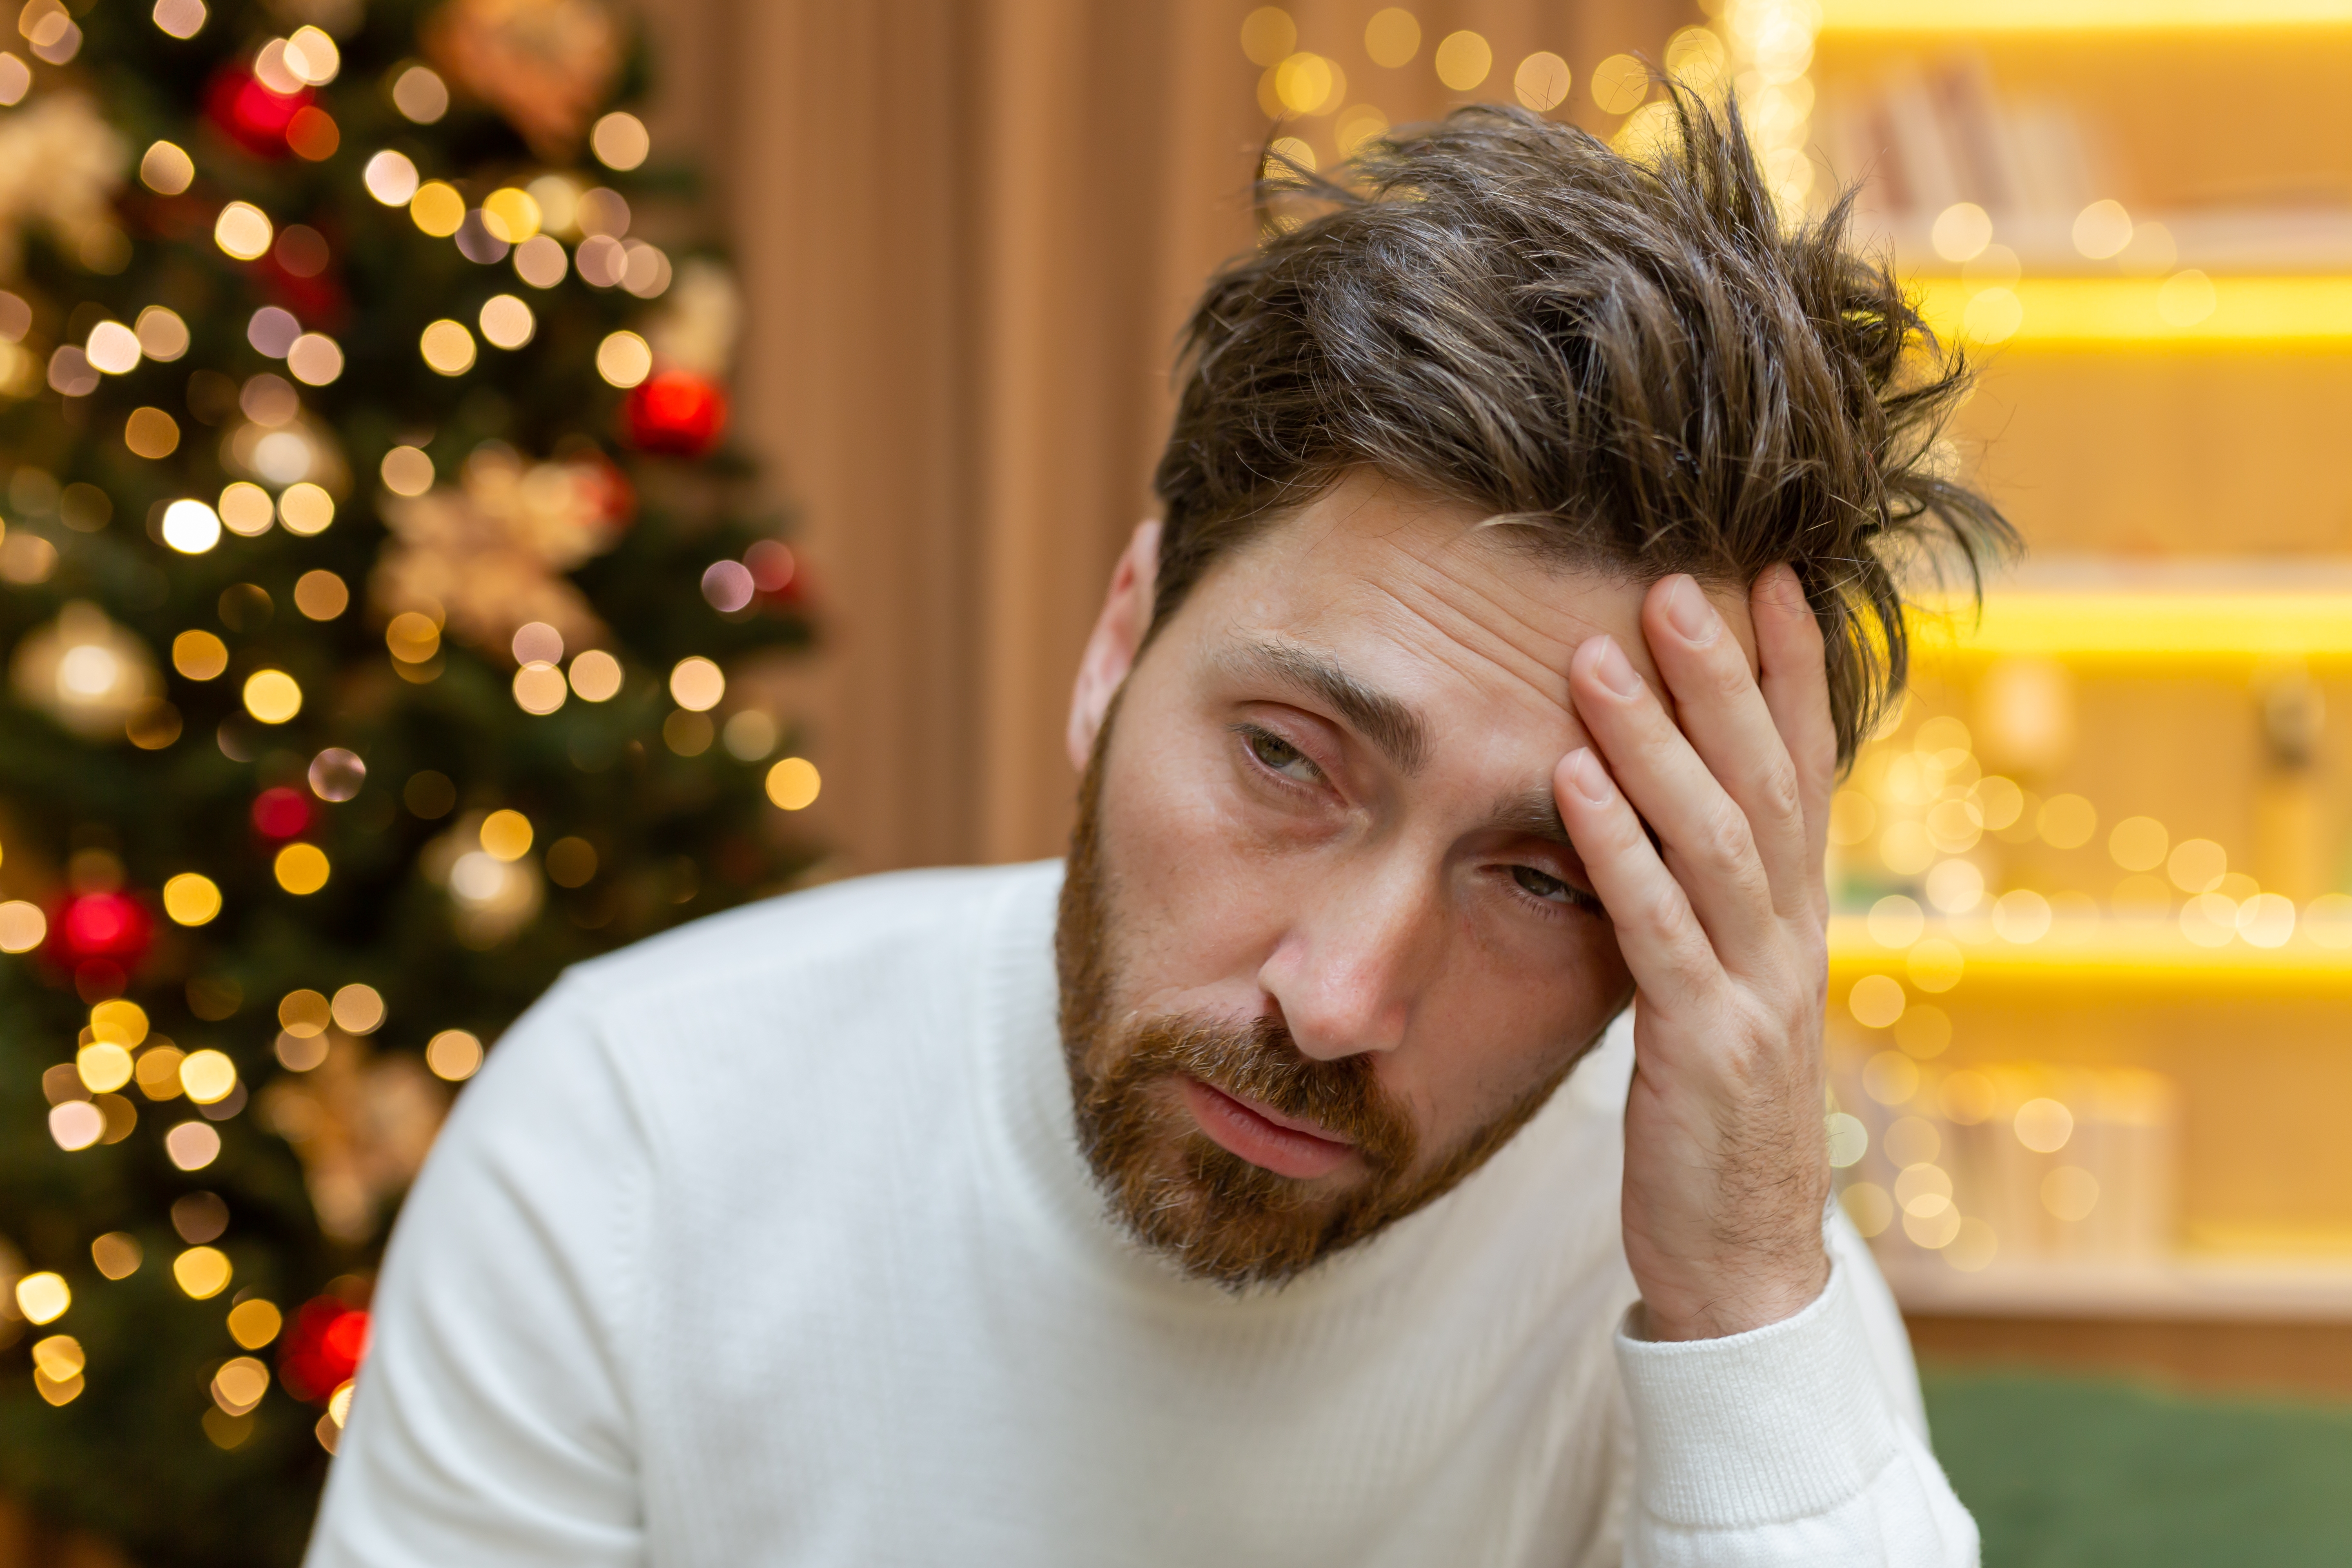 A depressed man sitting near a Christmas tree at home | Source: Shutterstock